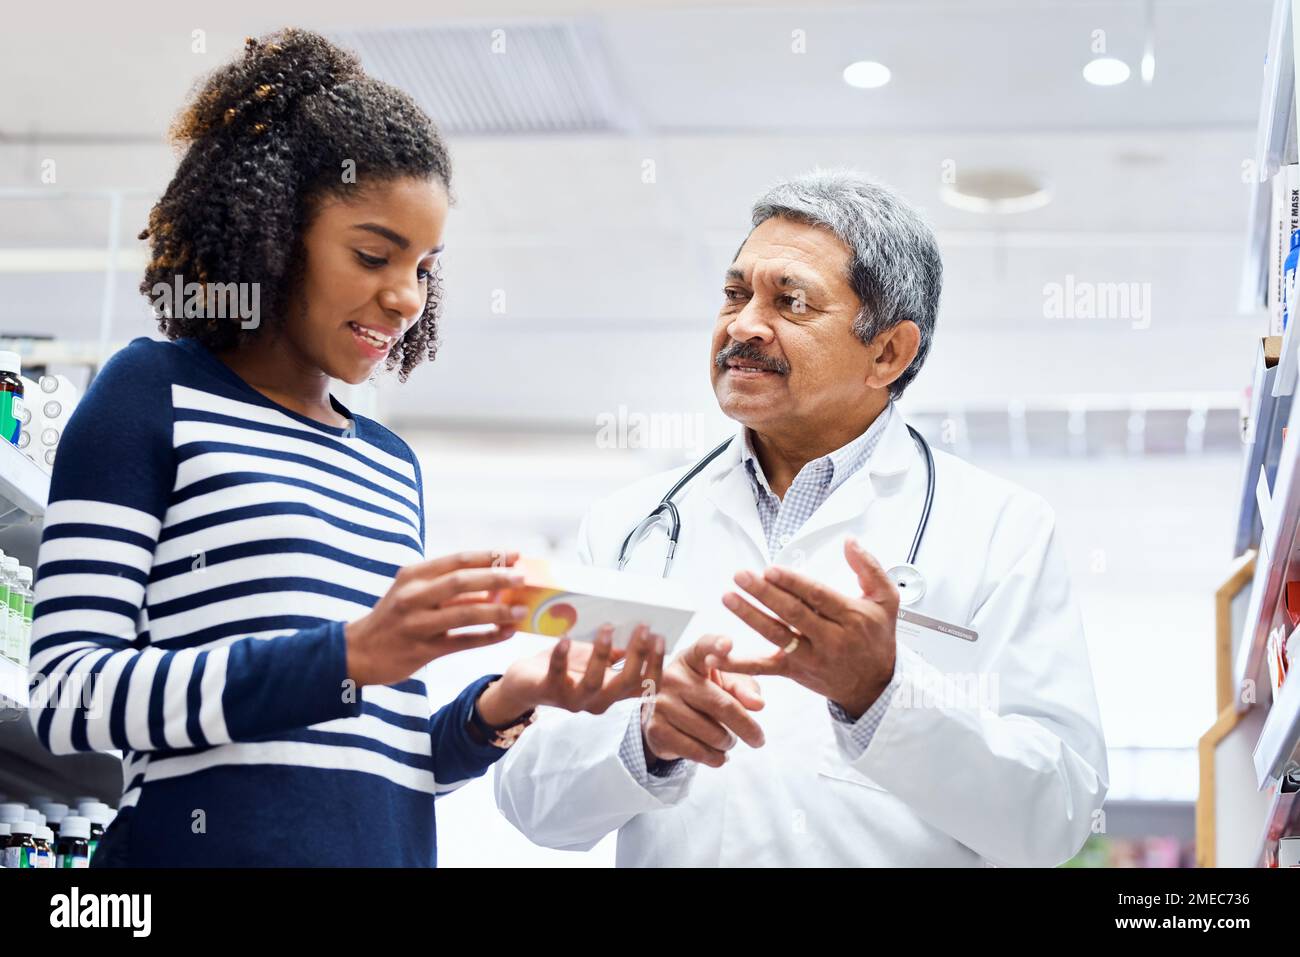 Take this daily until your symptoms clear. a pharmacist assisting a young woman in a chemist. Stock Photo